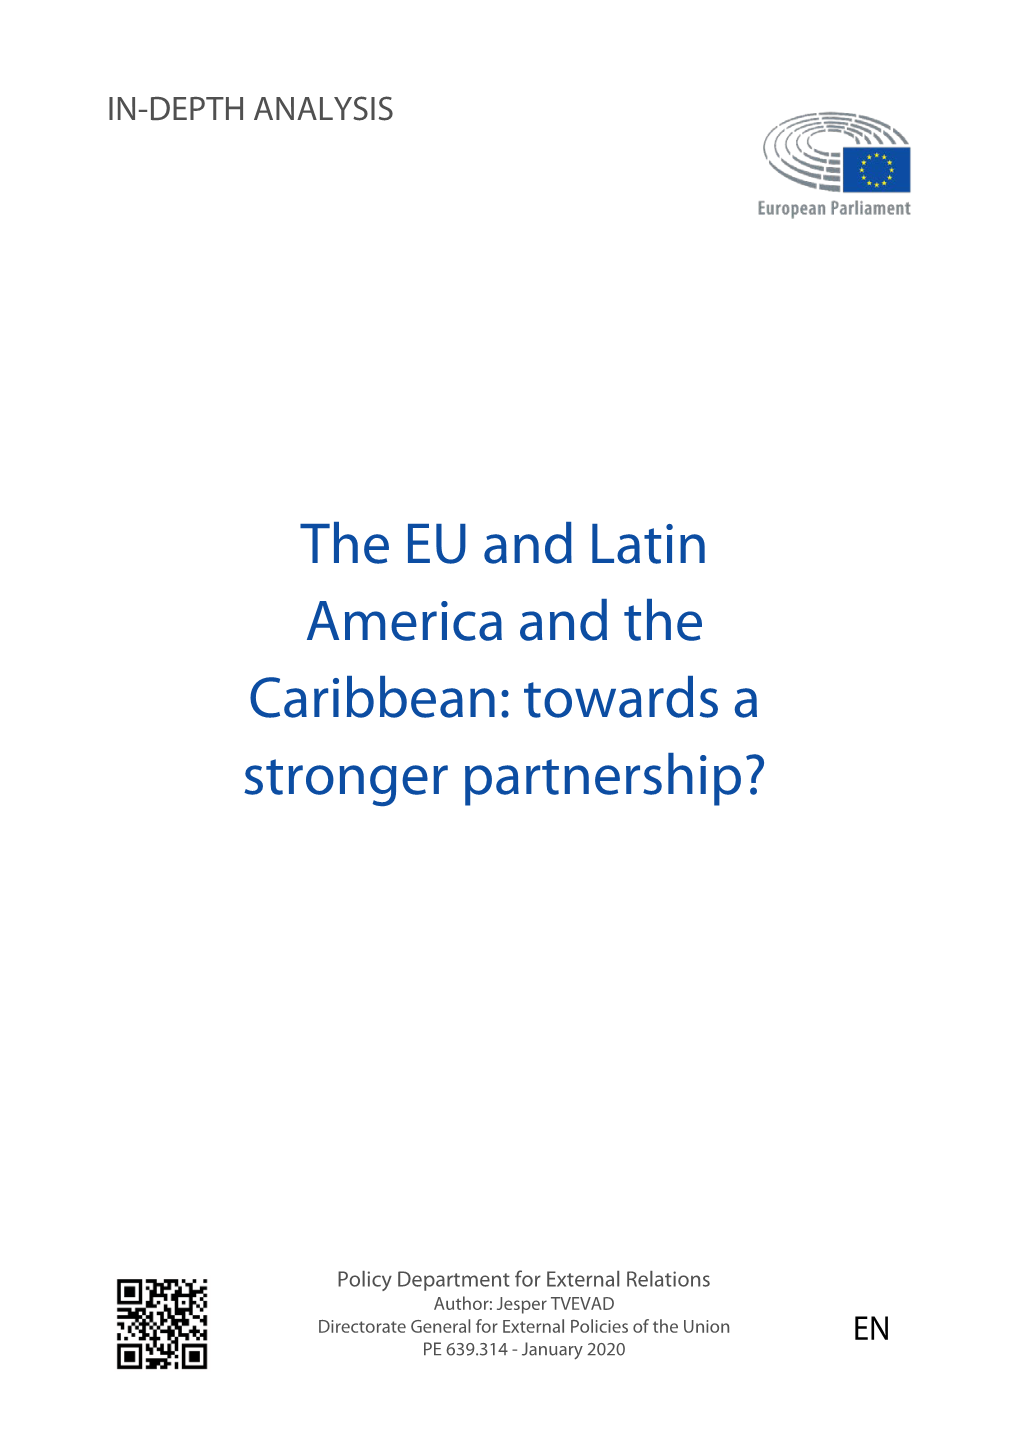 The EU and Latin America and the Caribbean: Towards a Stronger Partnership?